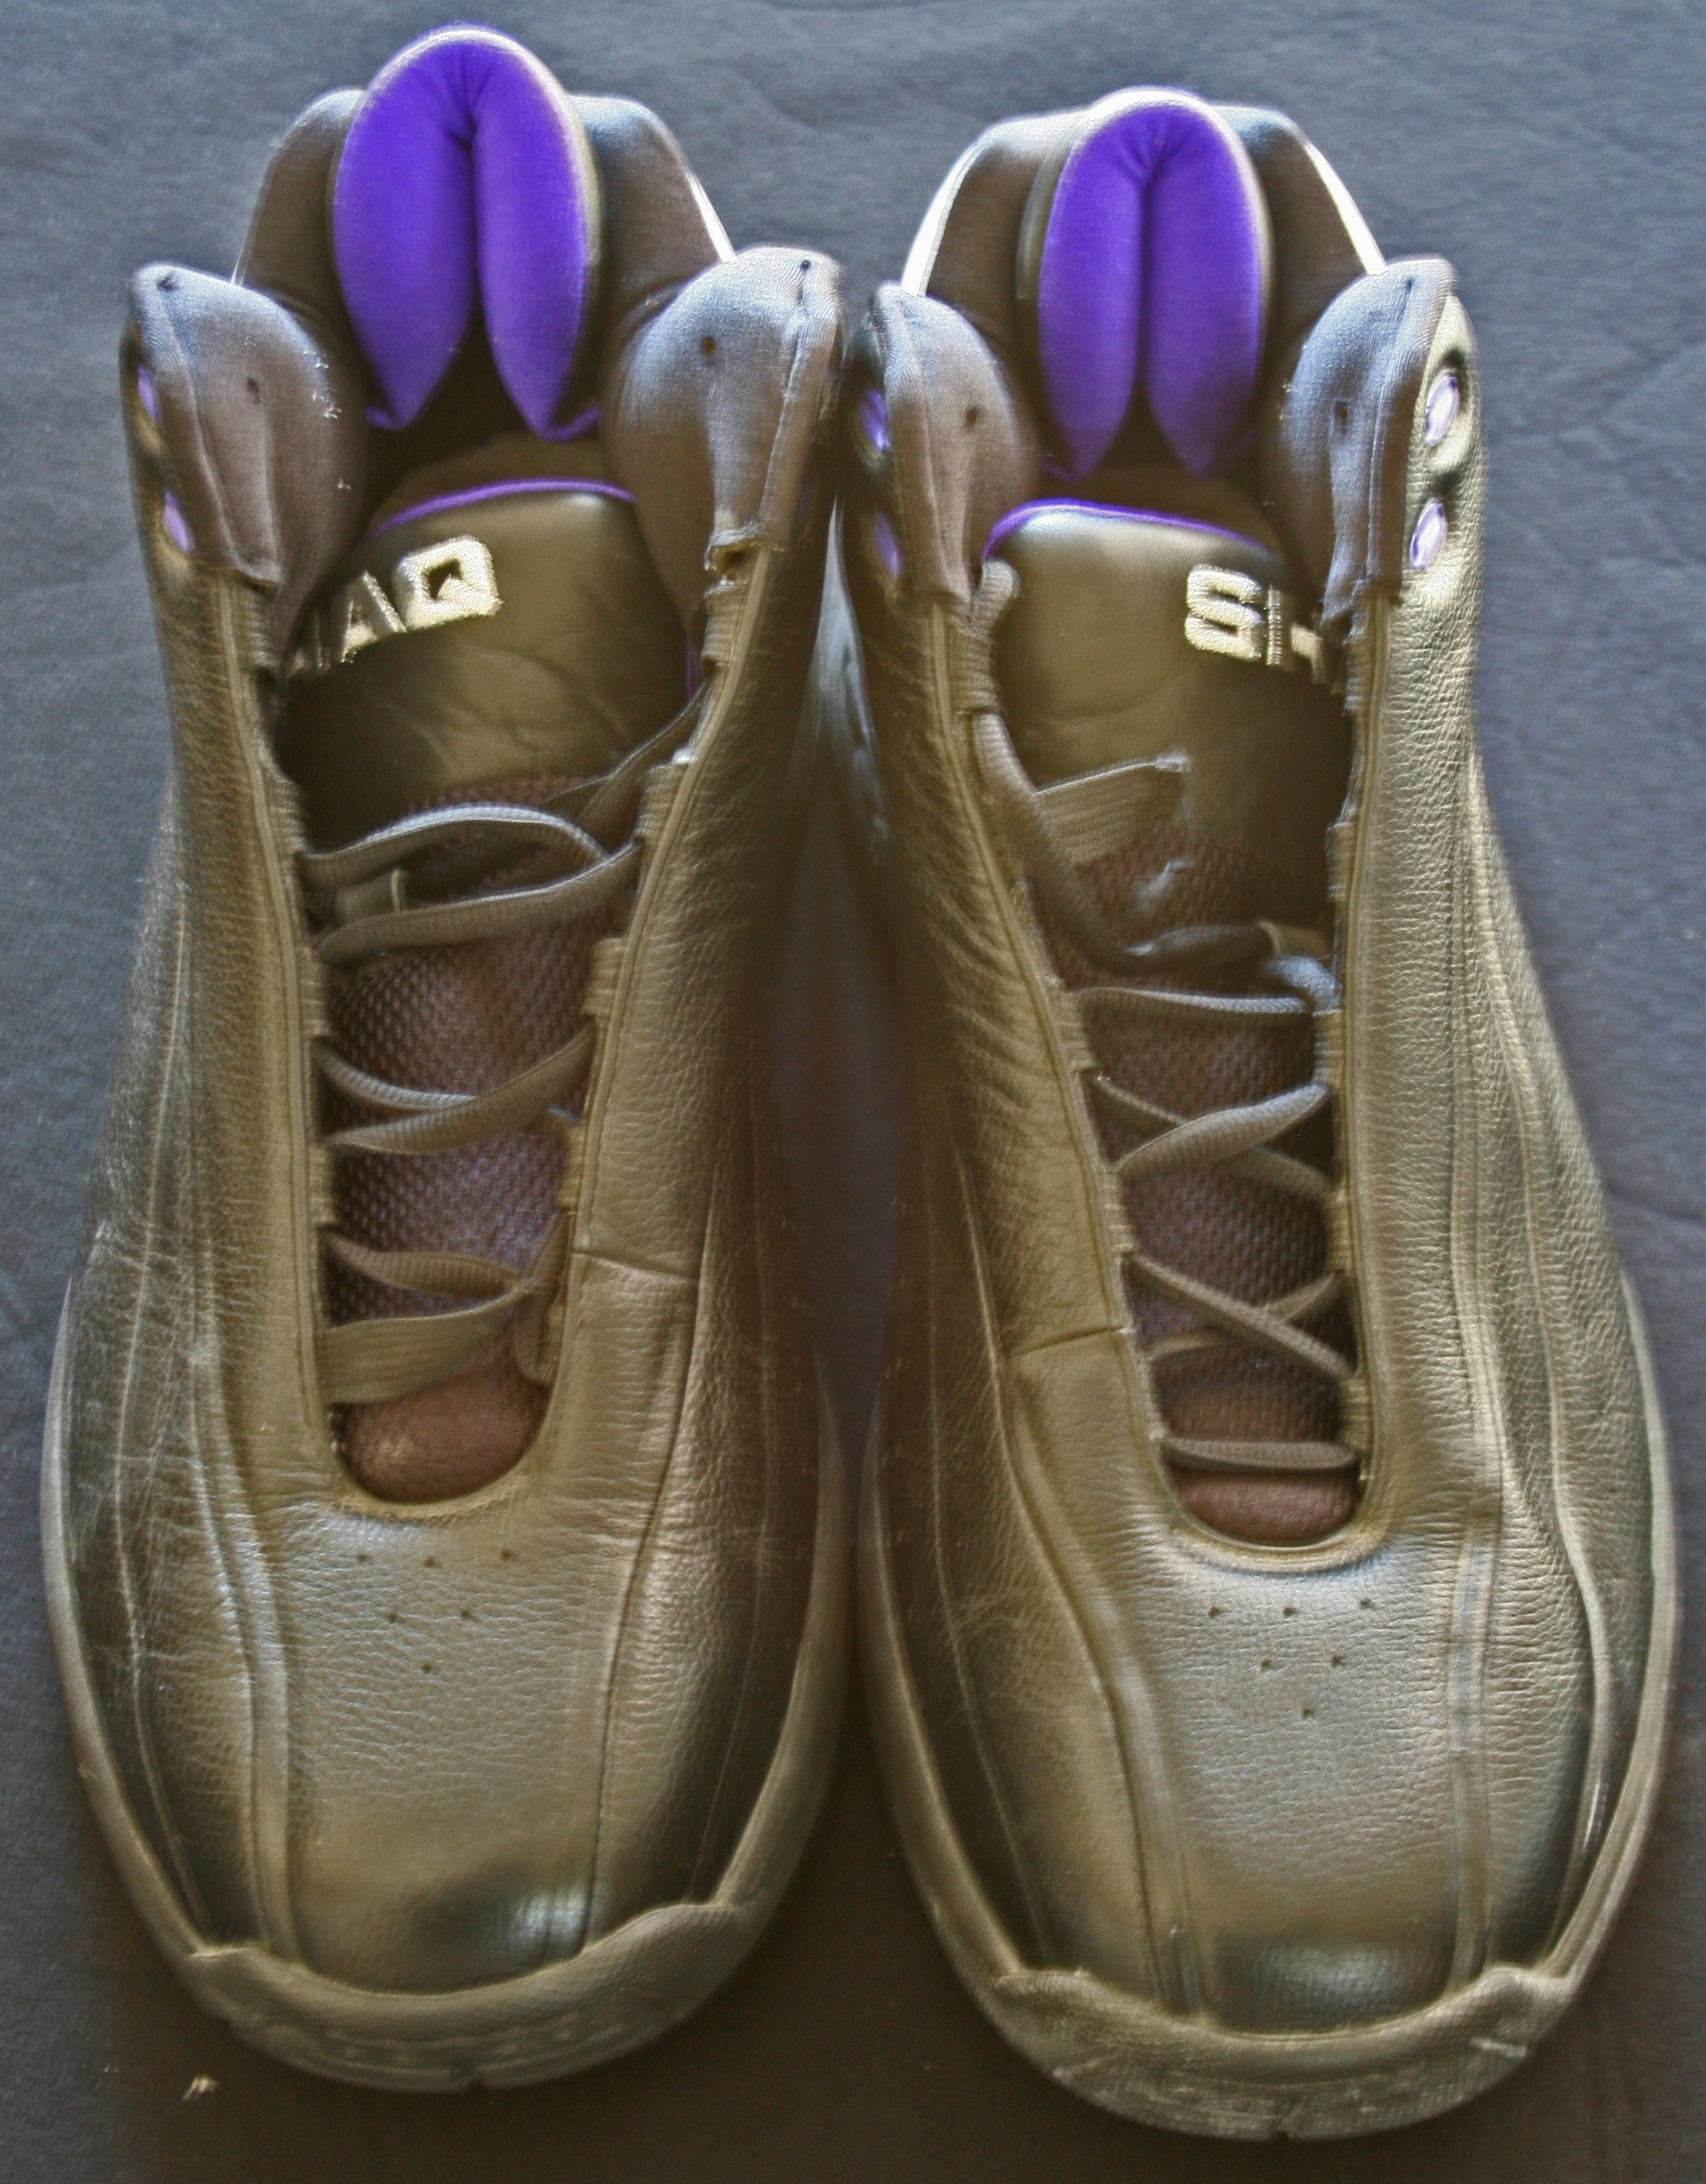 Circa 2004 Shaquille O'Neal Game Worn Los Angeles Lakers Shooting, Lot  #82304